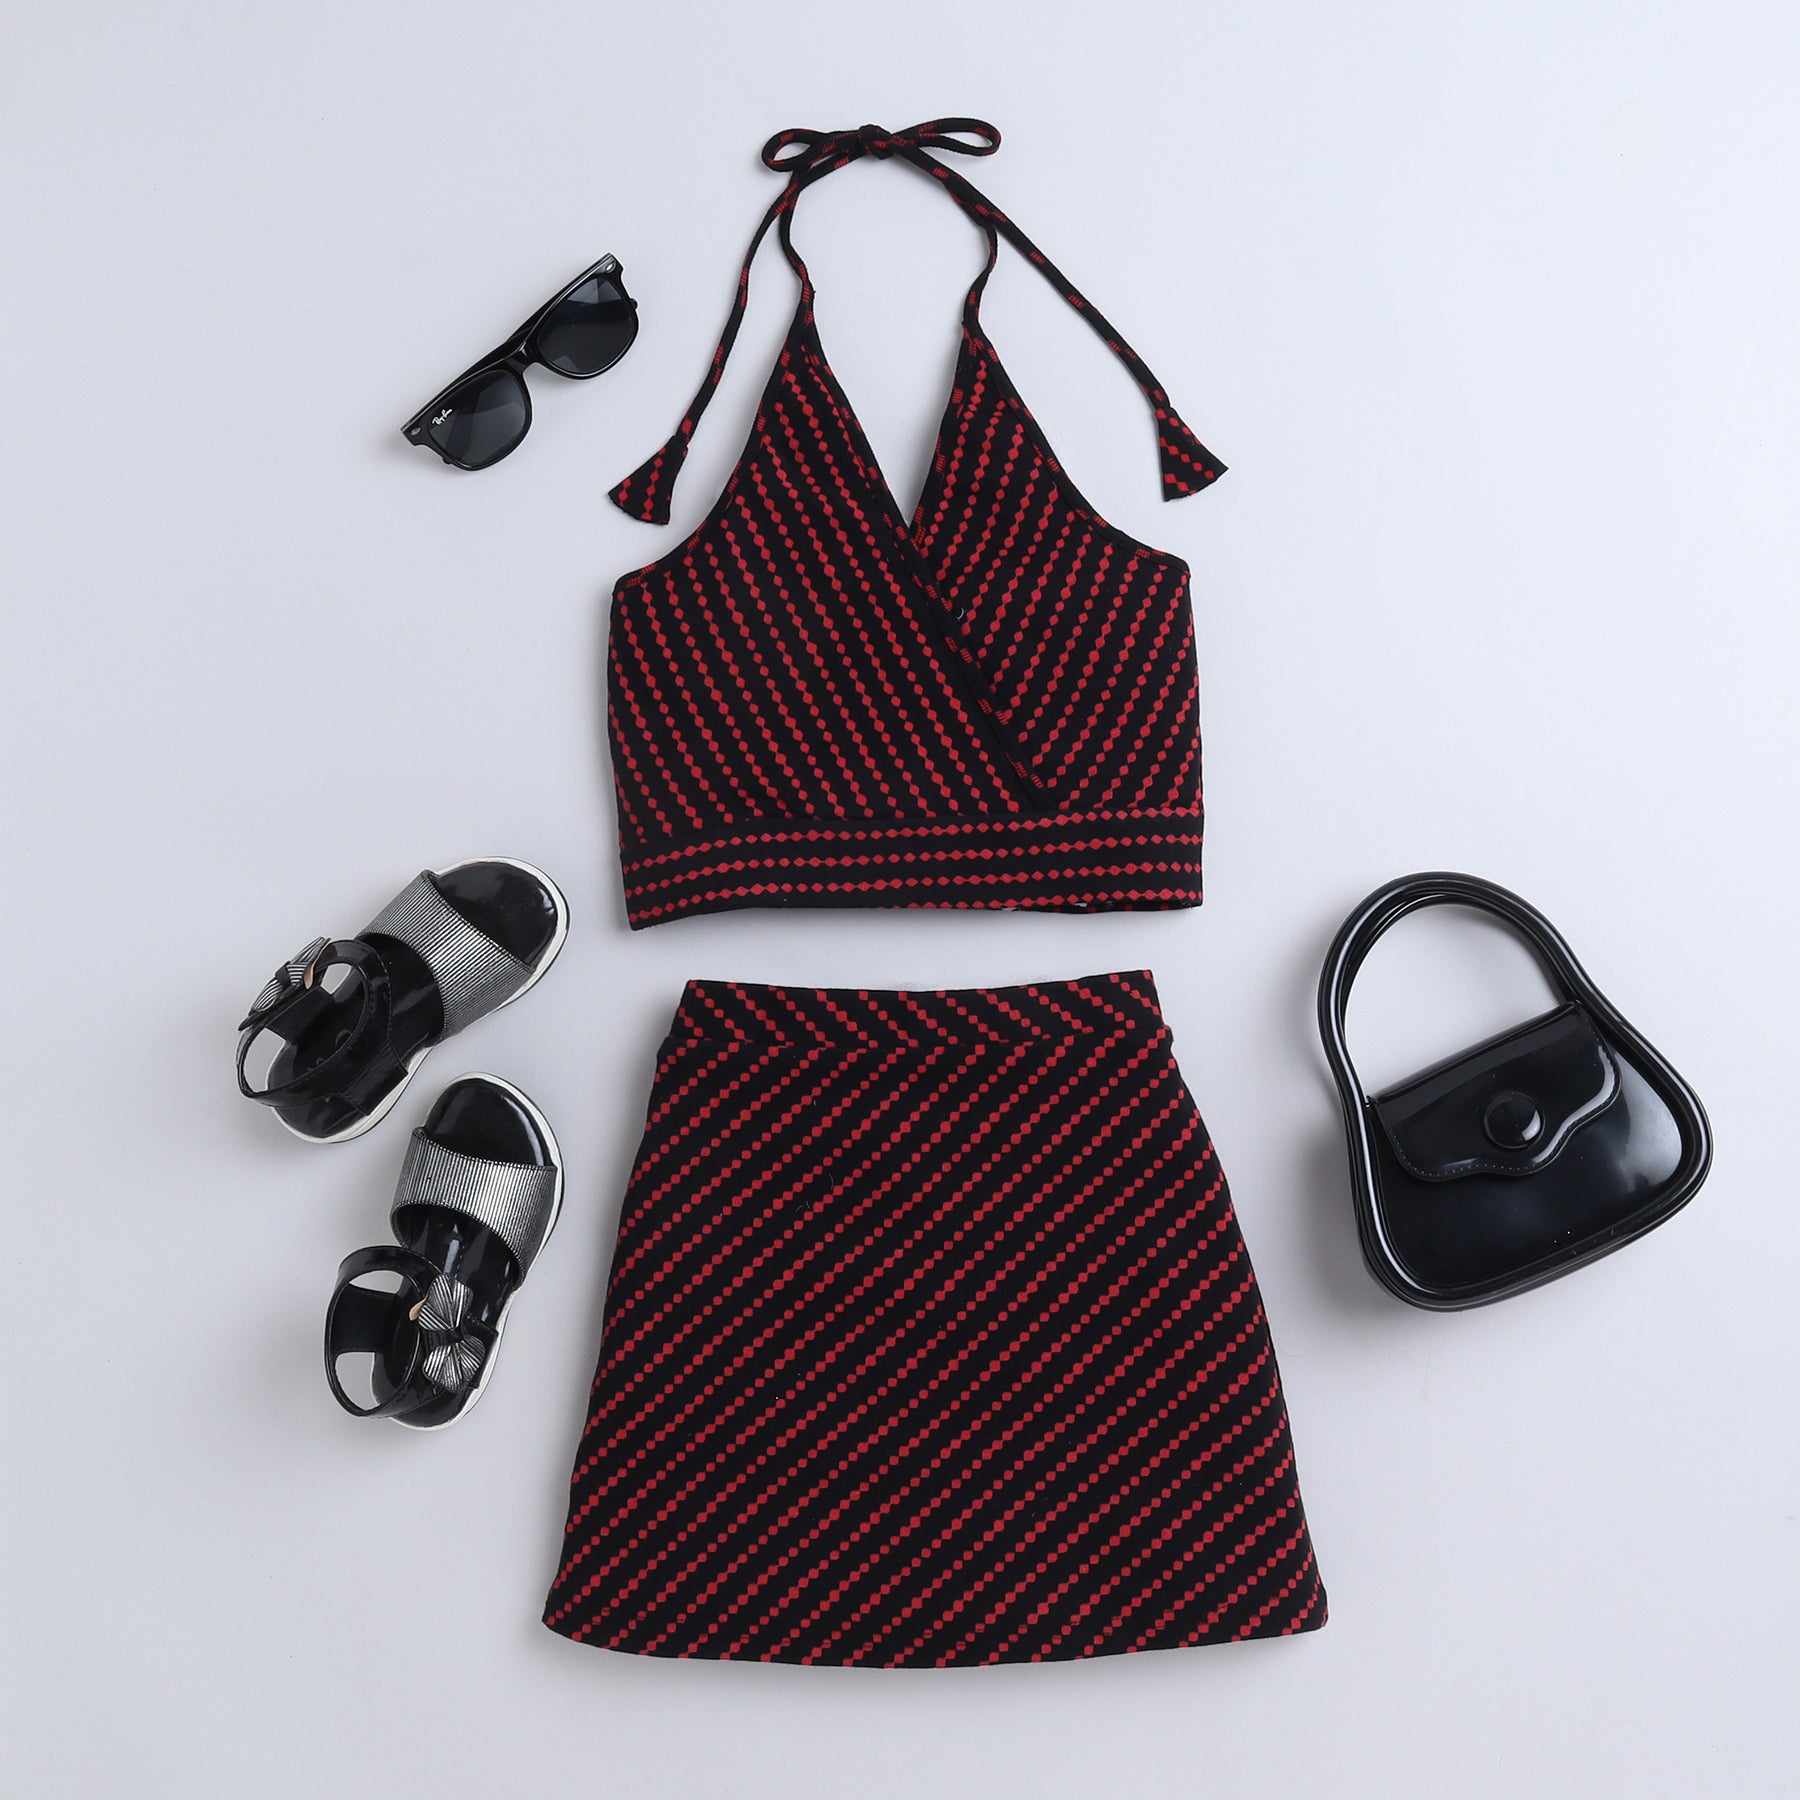 100% cotton stripes printed halter neck crop top with matching skirt set - Black and red